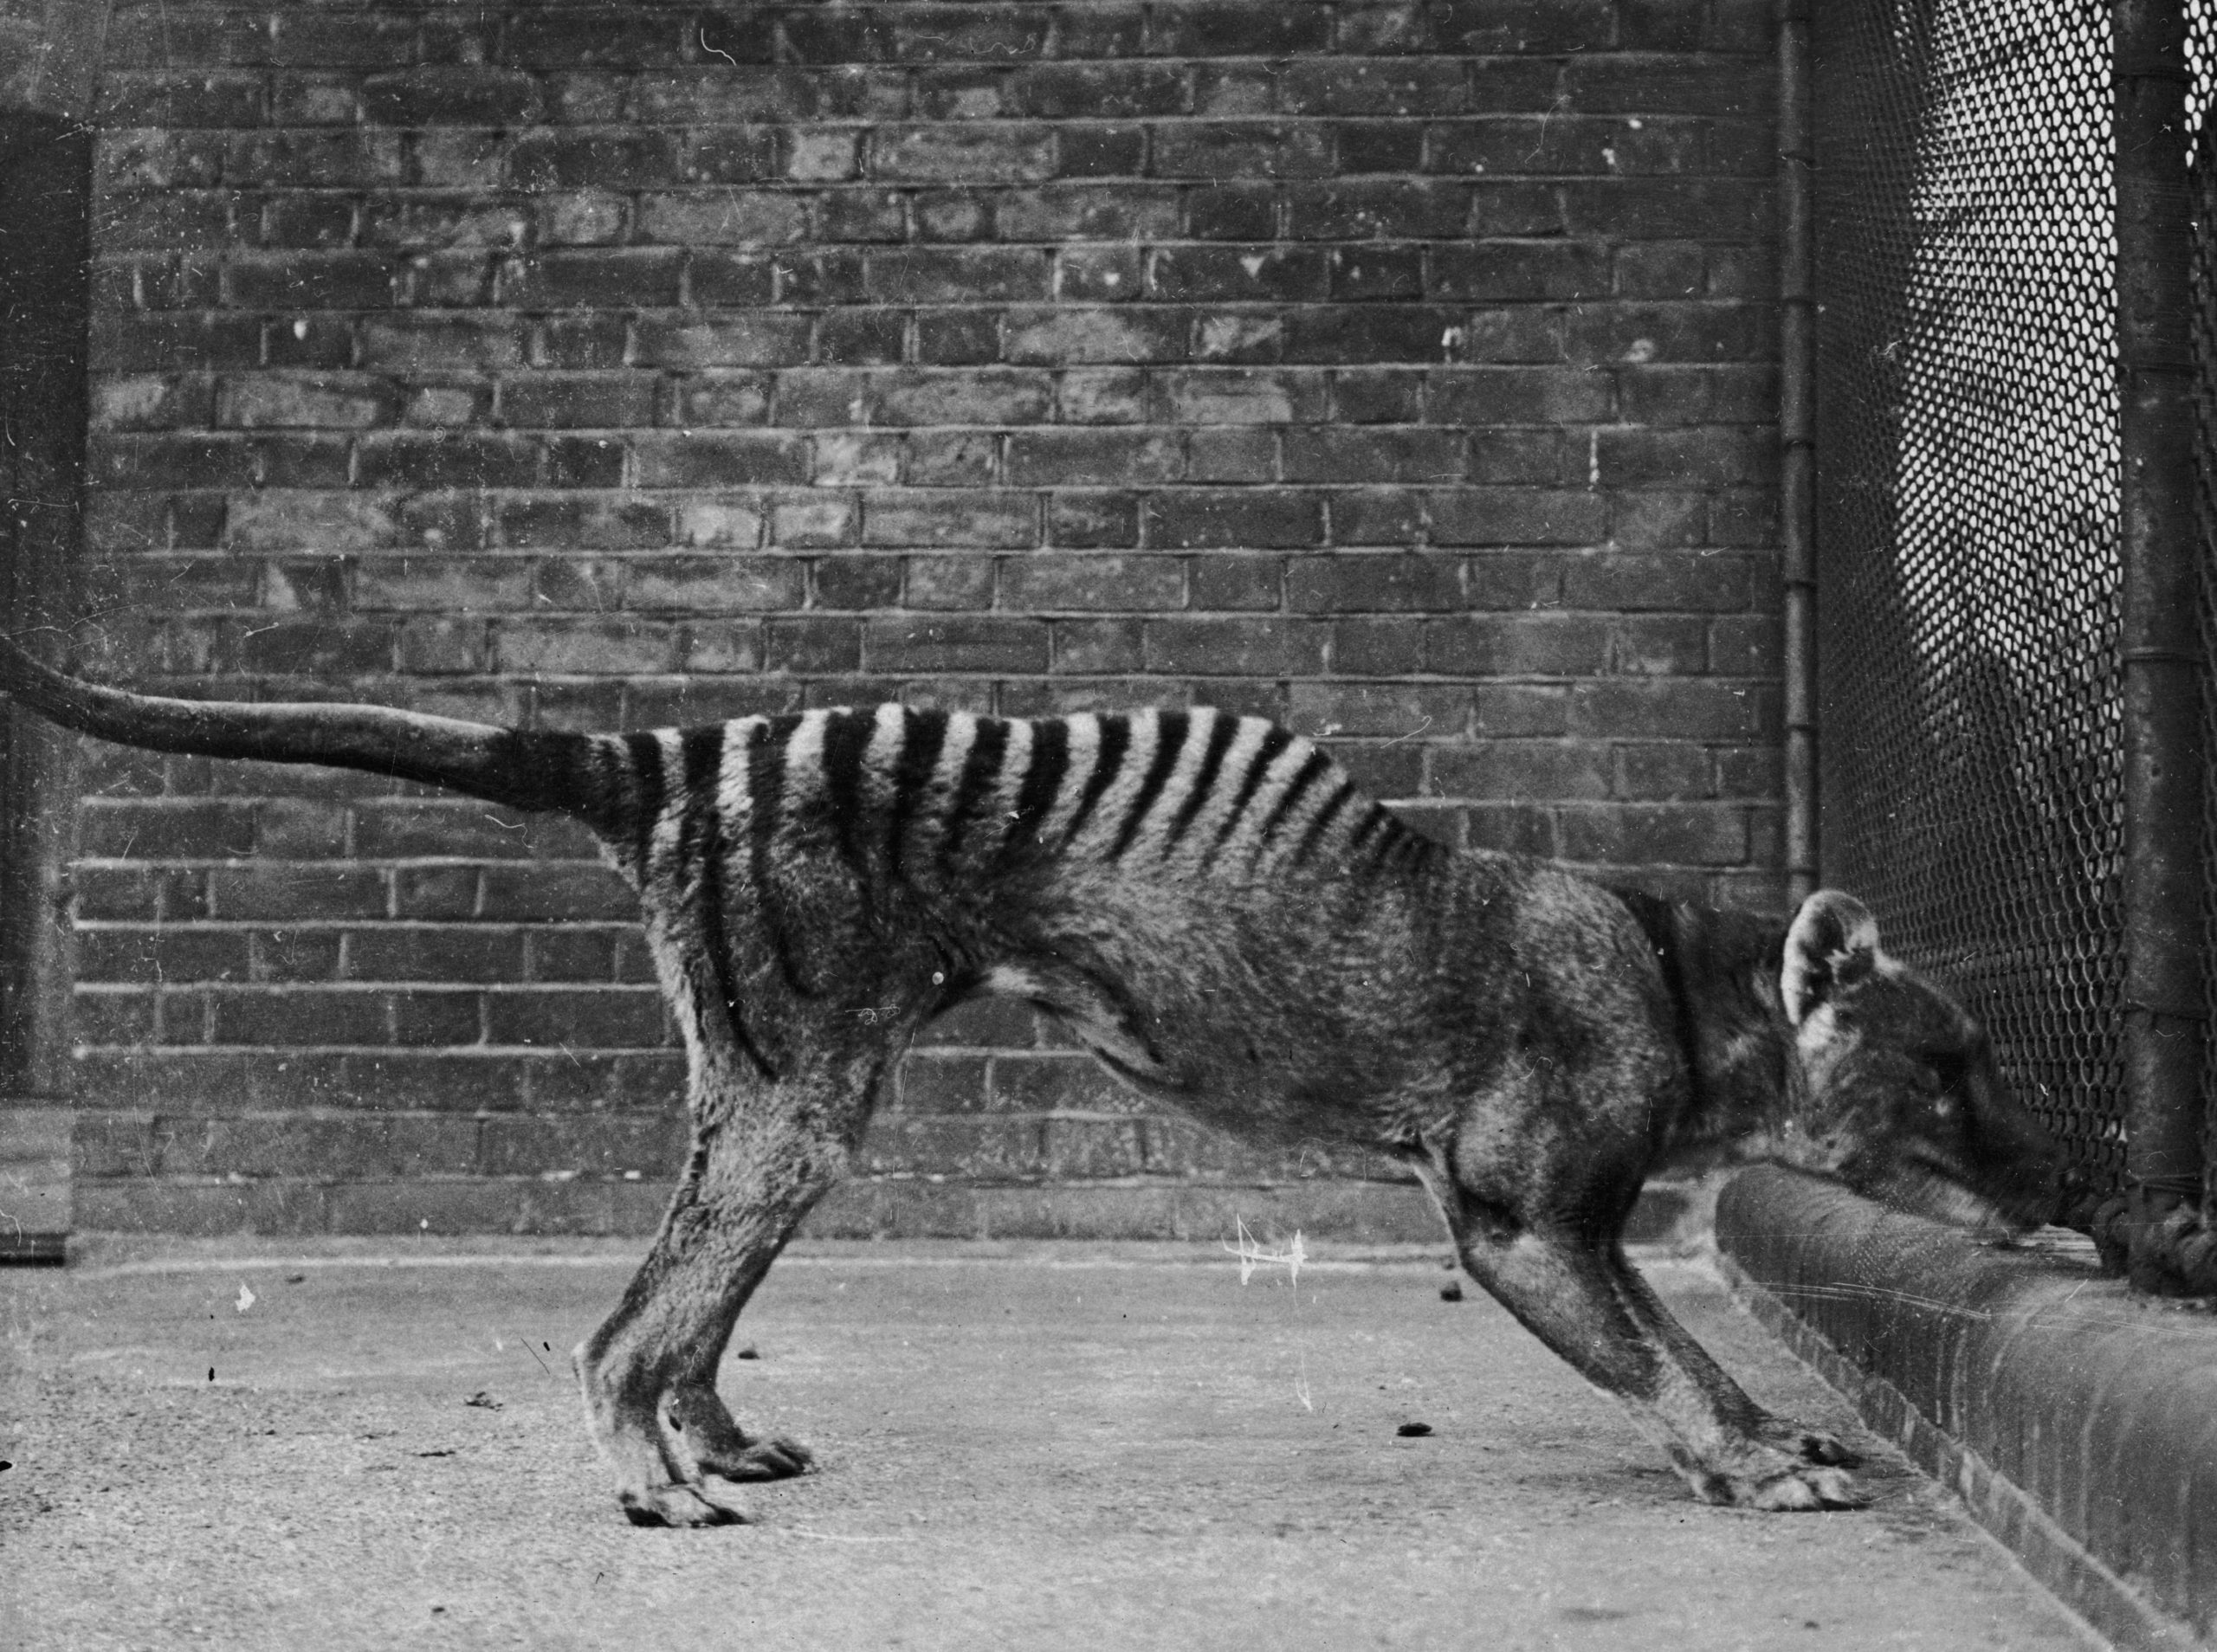 A thylacine in captivity in the 1930s. (Photo: Topical Press Agency/Hulton Archive/Getty Images, Getty Images)